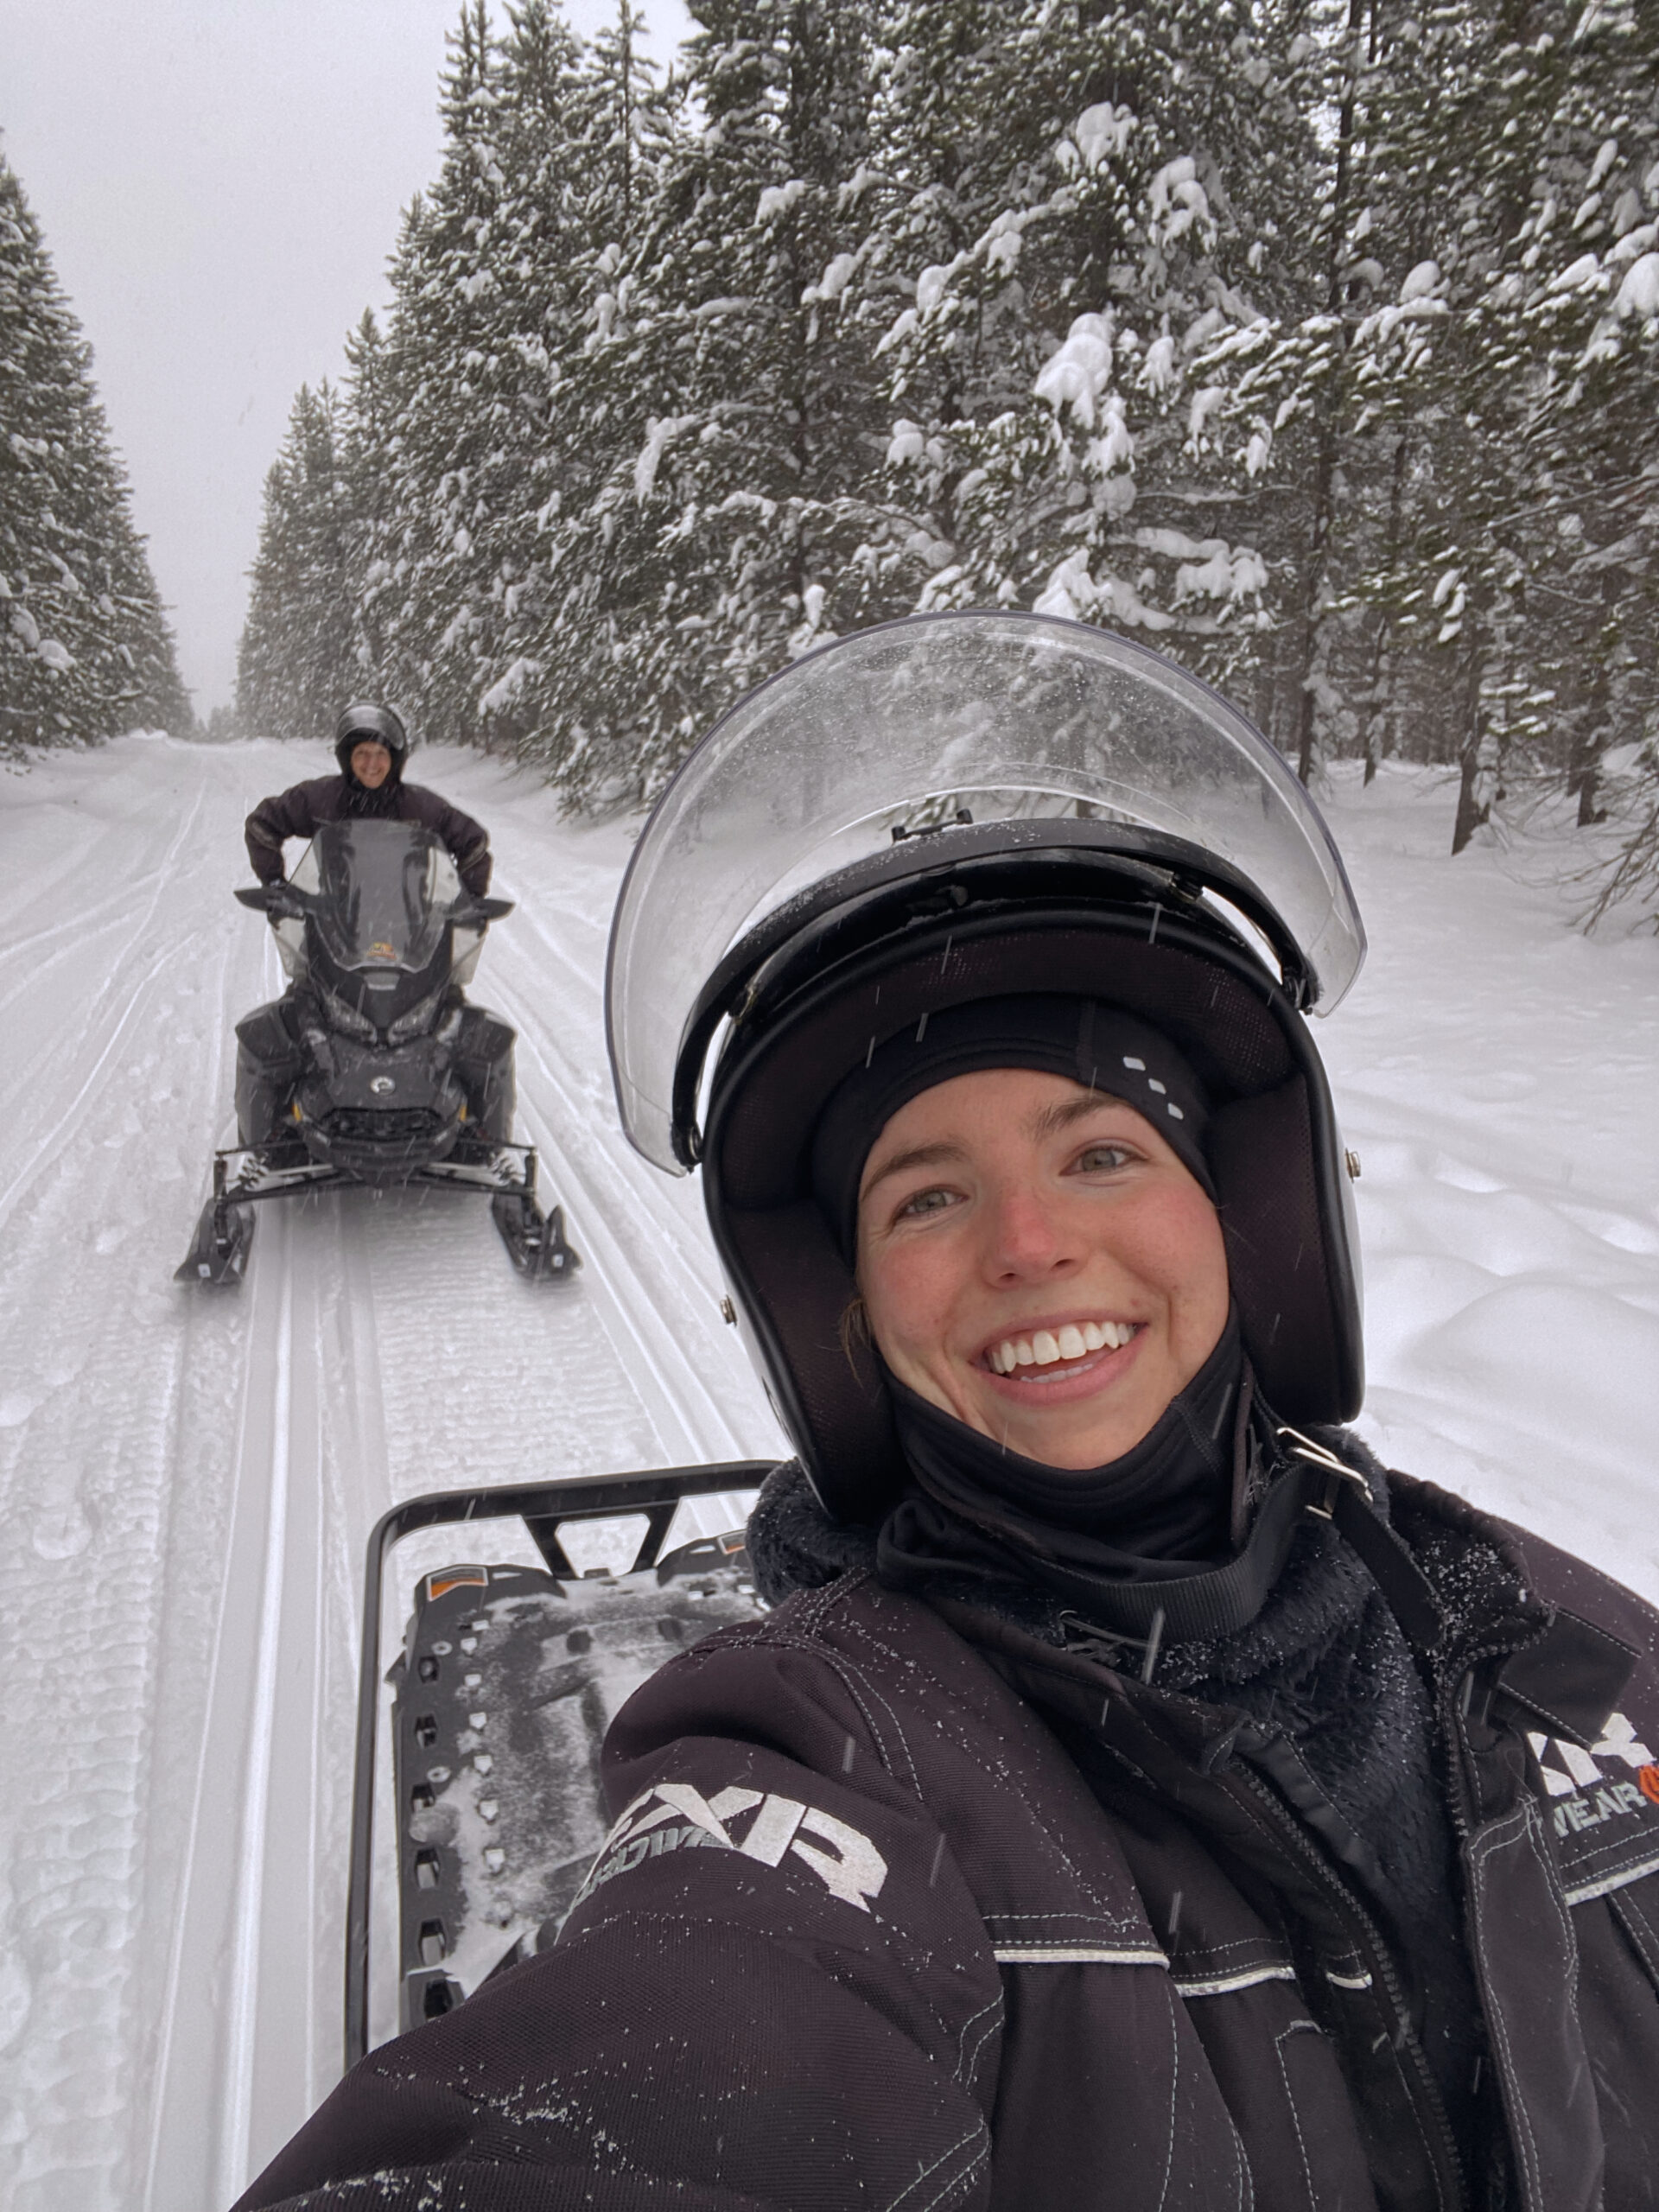 snowmobiling in the winter in jackson hole, wyoming